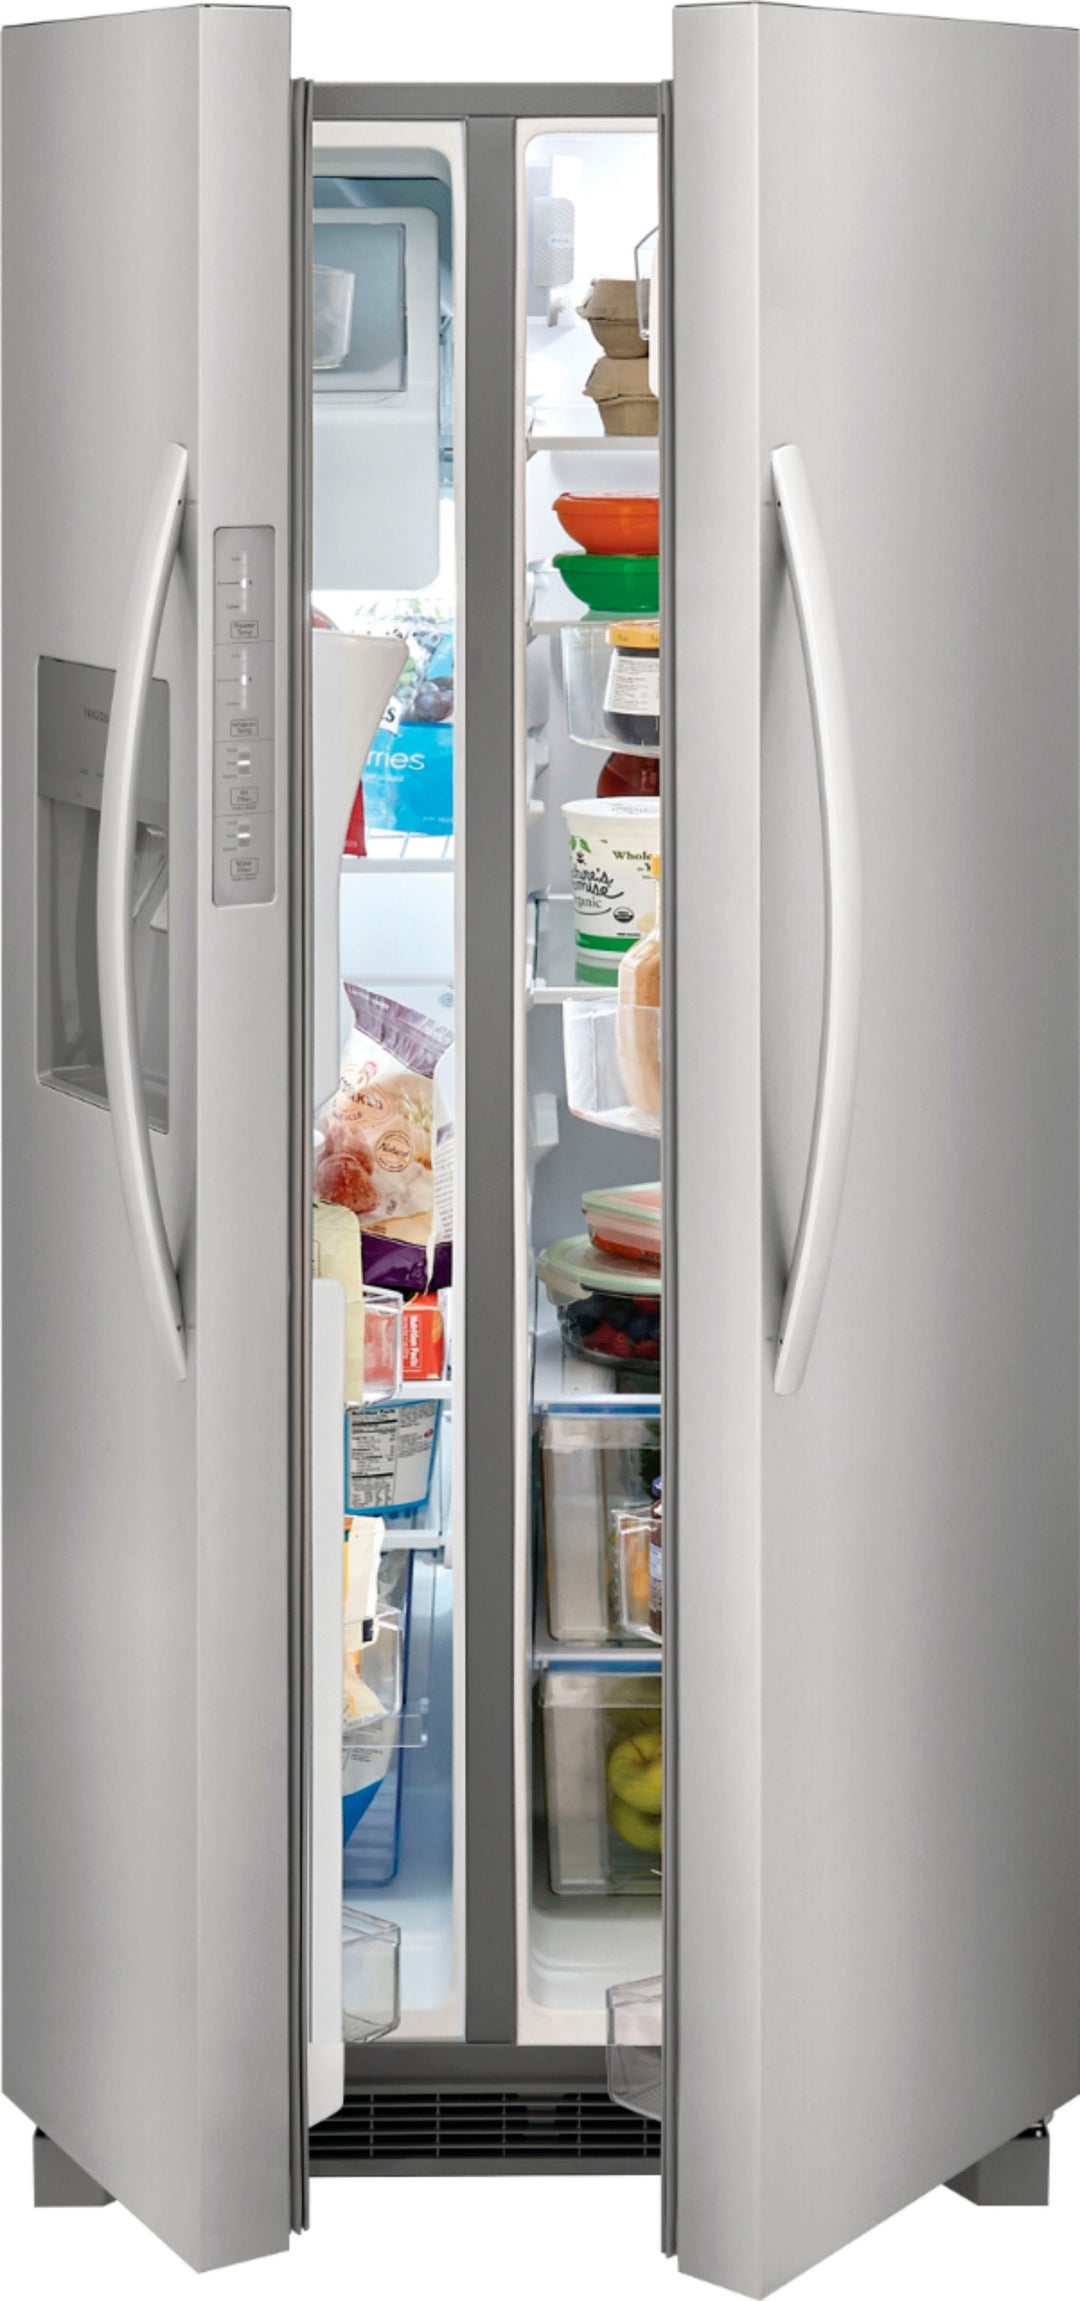 Frigidaire - 22.3 Cu. Ft. Side-by-Side Refrigerator - Stainless steel_7